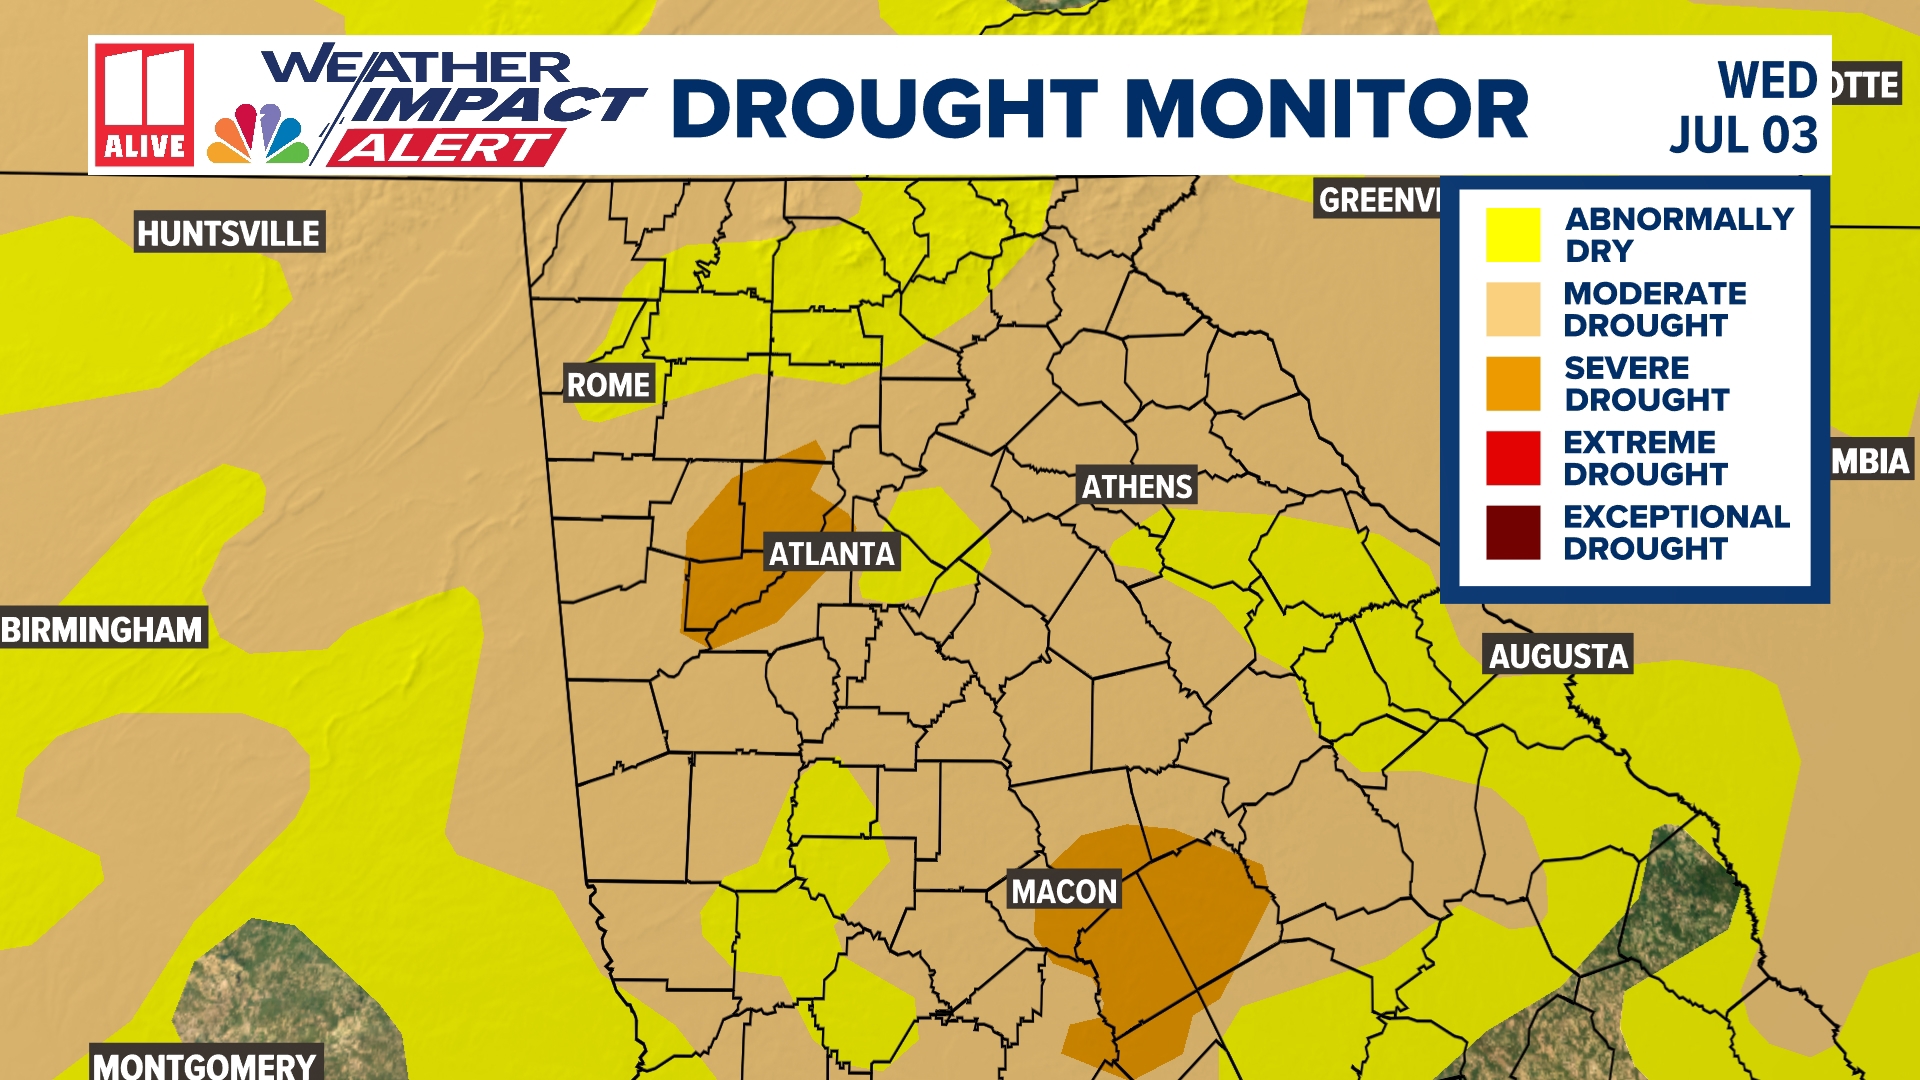 The hot and drought June has led to a rapid drought development